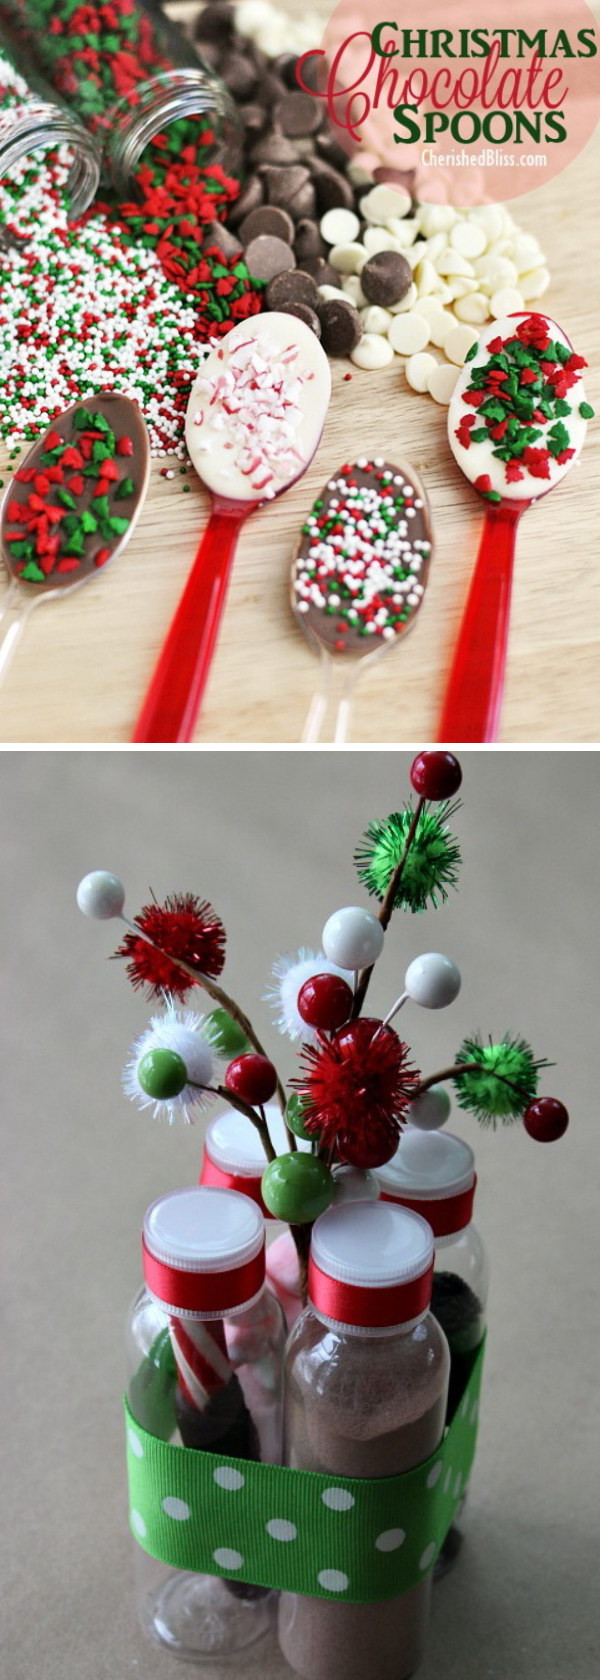 DIY Christmas Gifts Videos
 20 Awesome DIY Christmas Gift Ideas & Tutorials